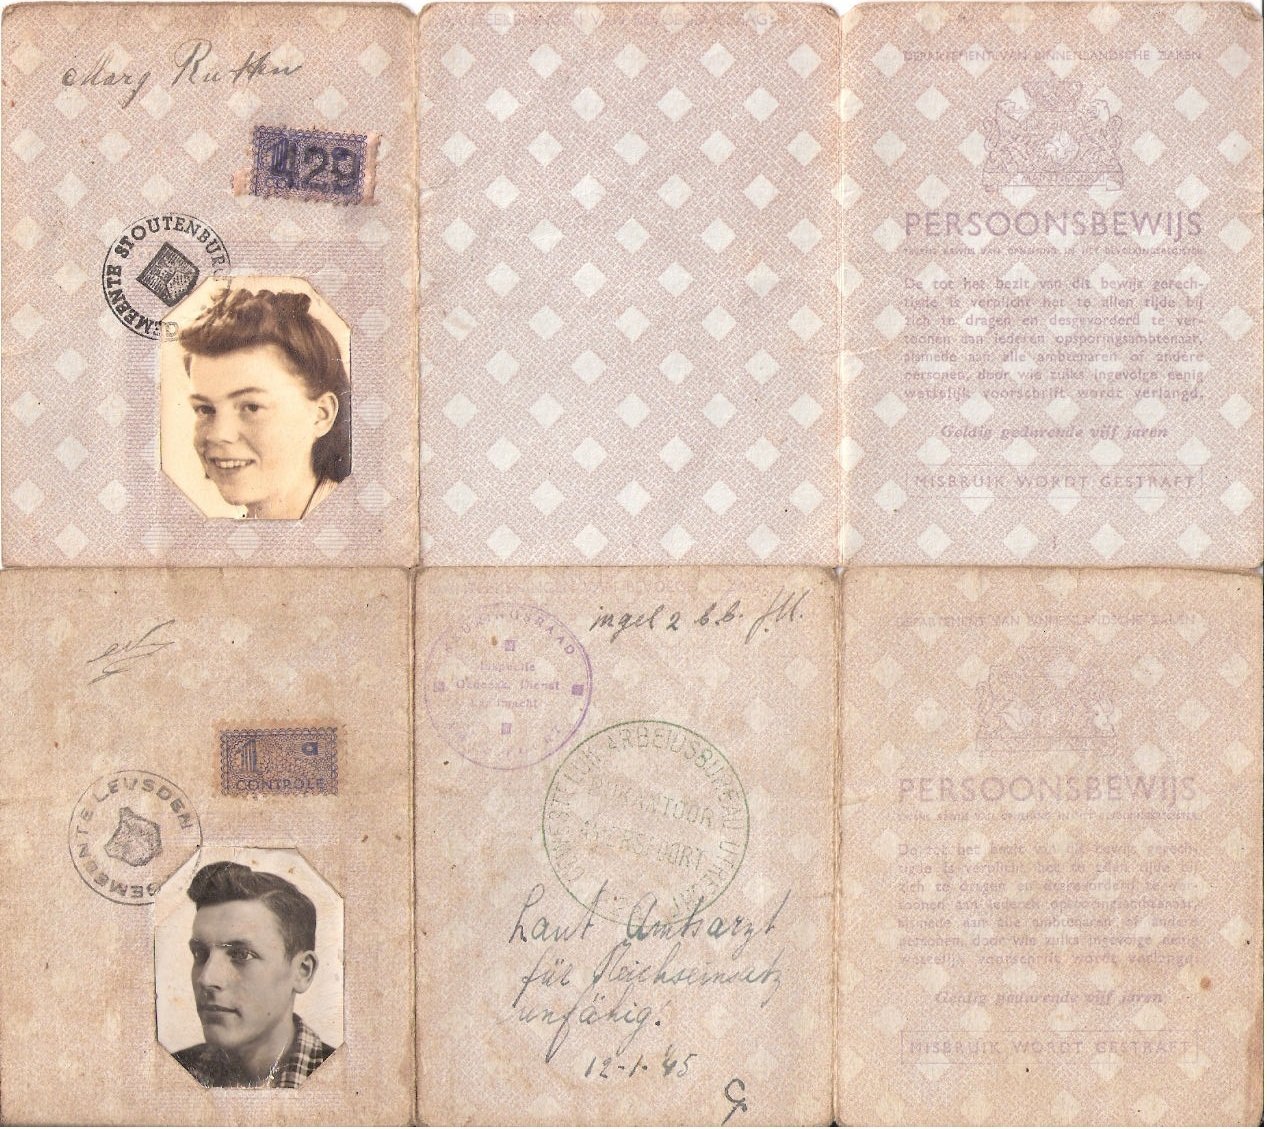 Documents showing photos of Margaret and Carl Kaas in 1945